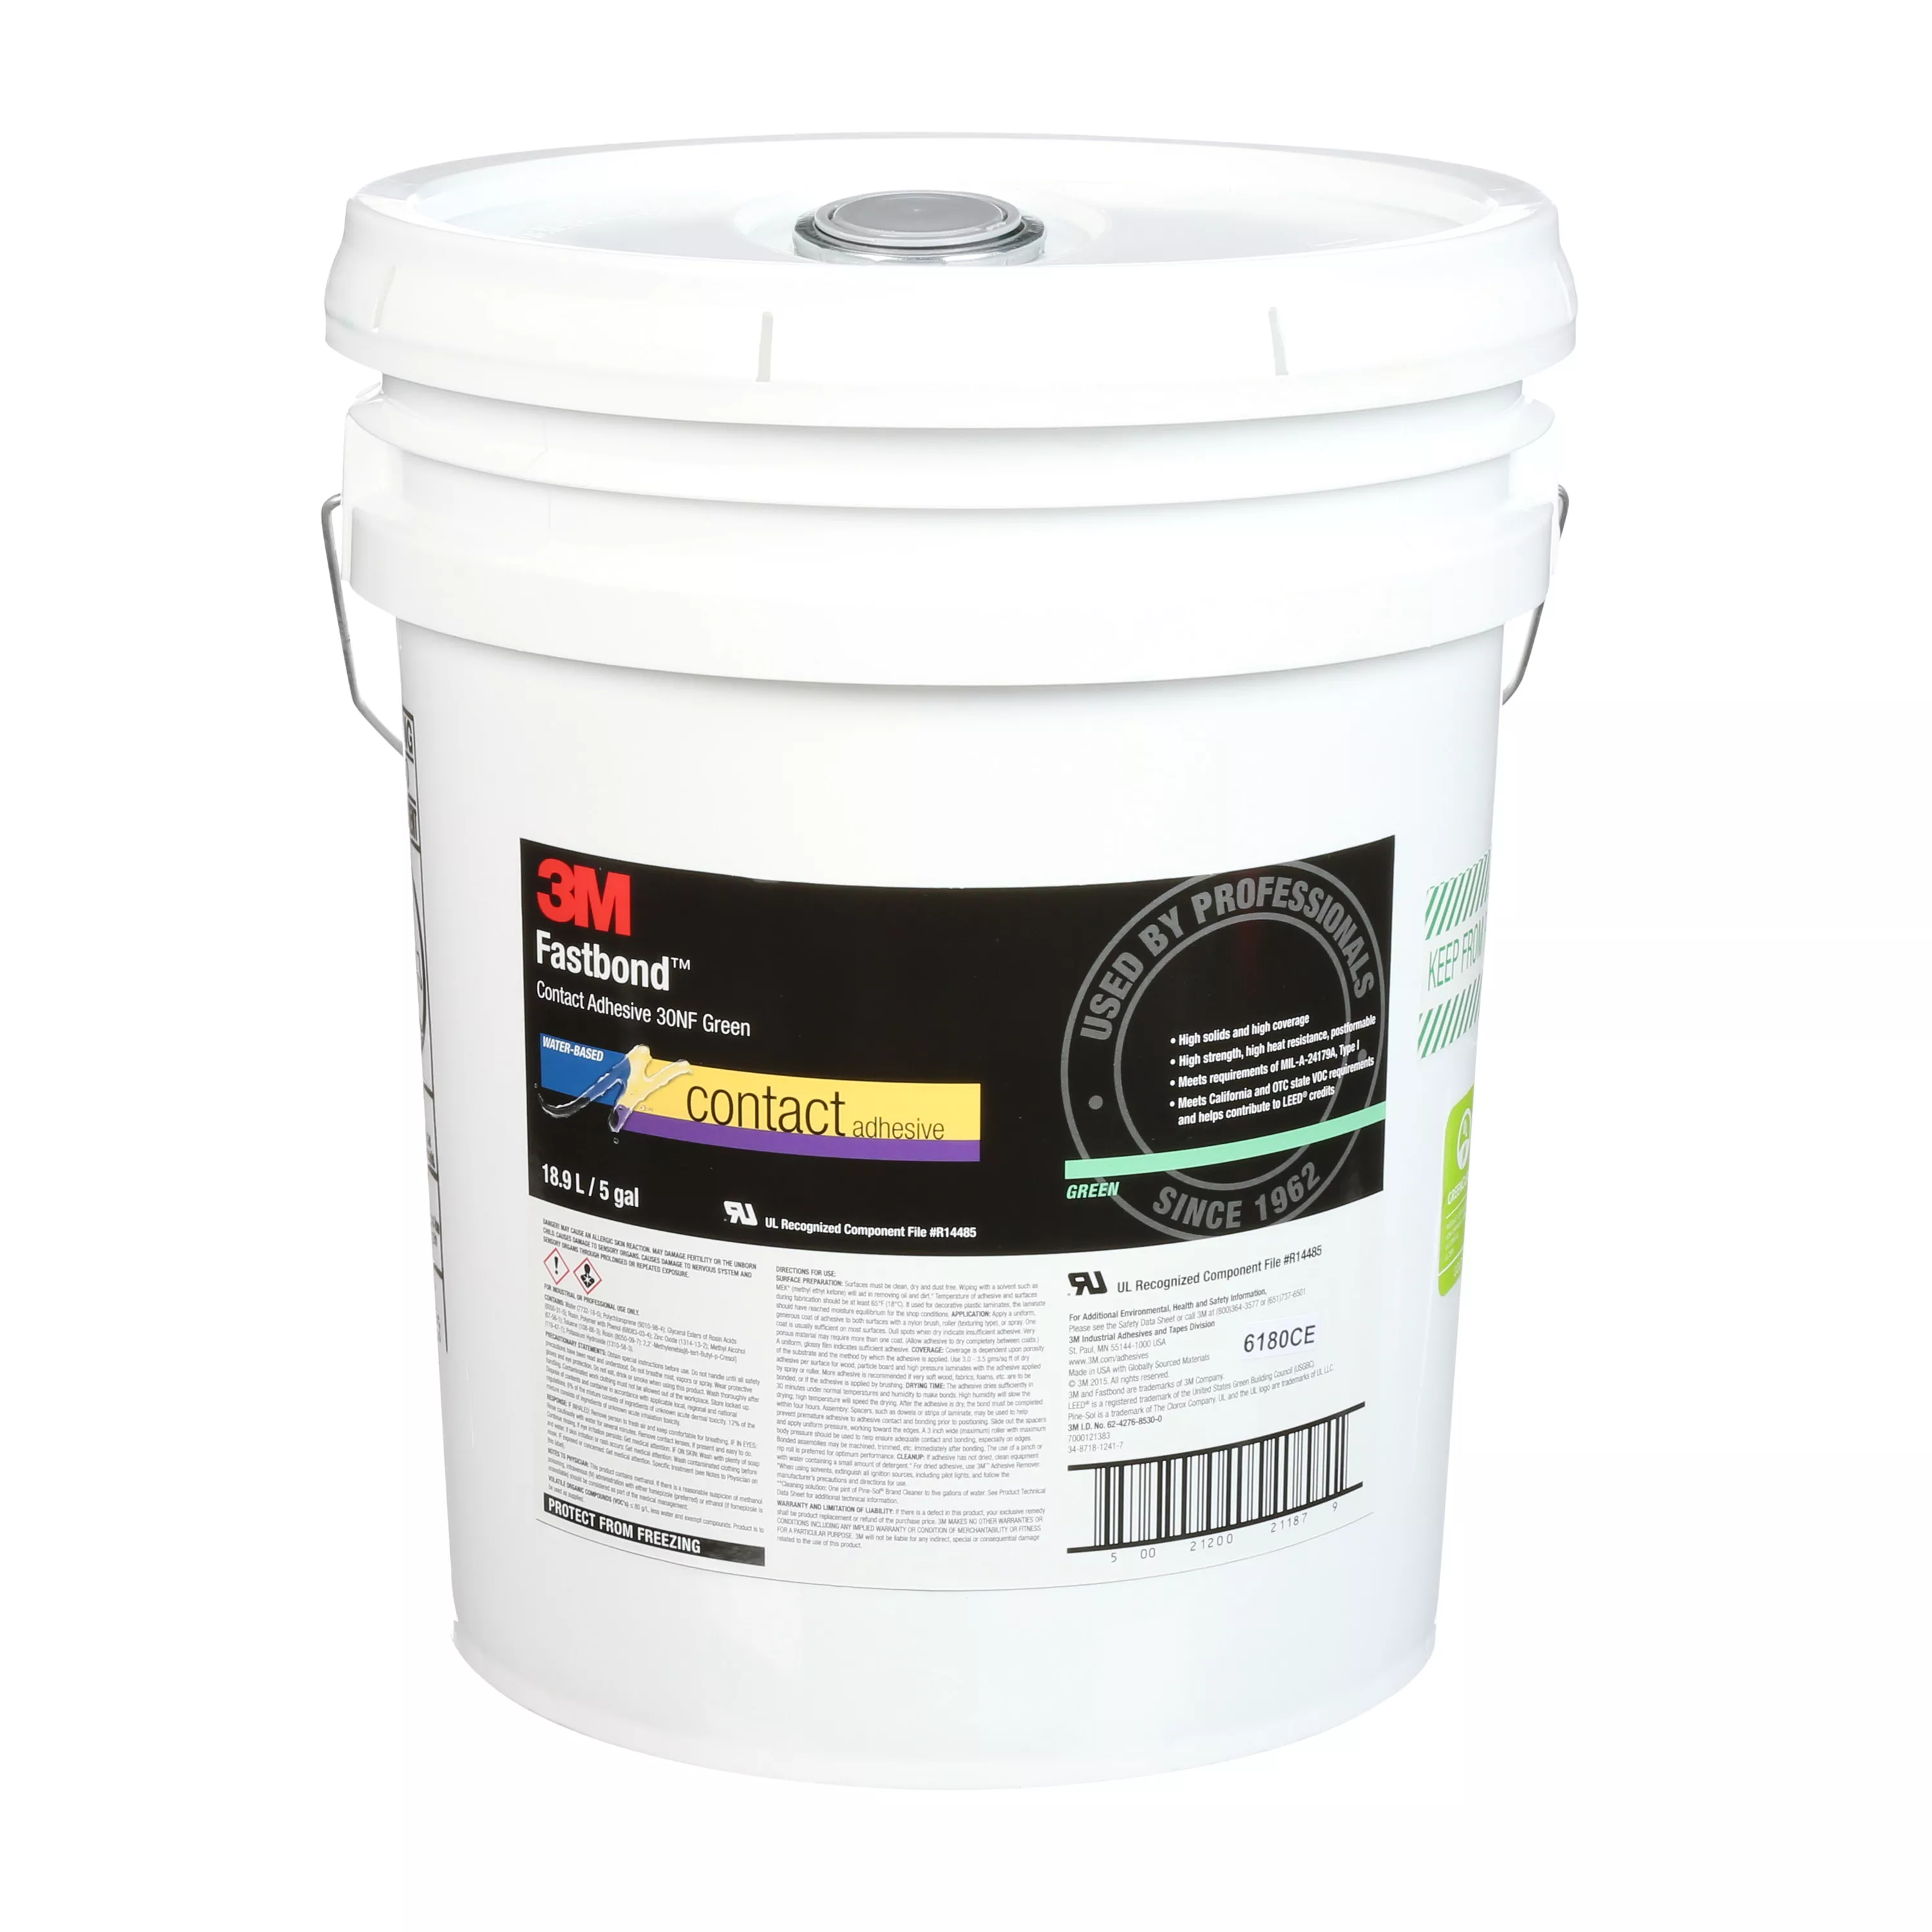 SKU 7000121383 | 3M™ Fastbond™ Contact Adhesive 30NF